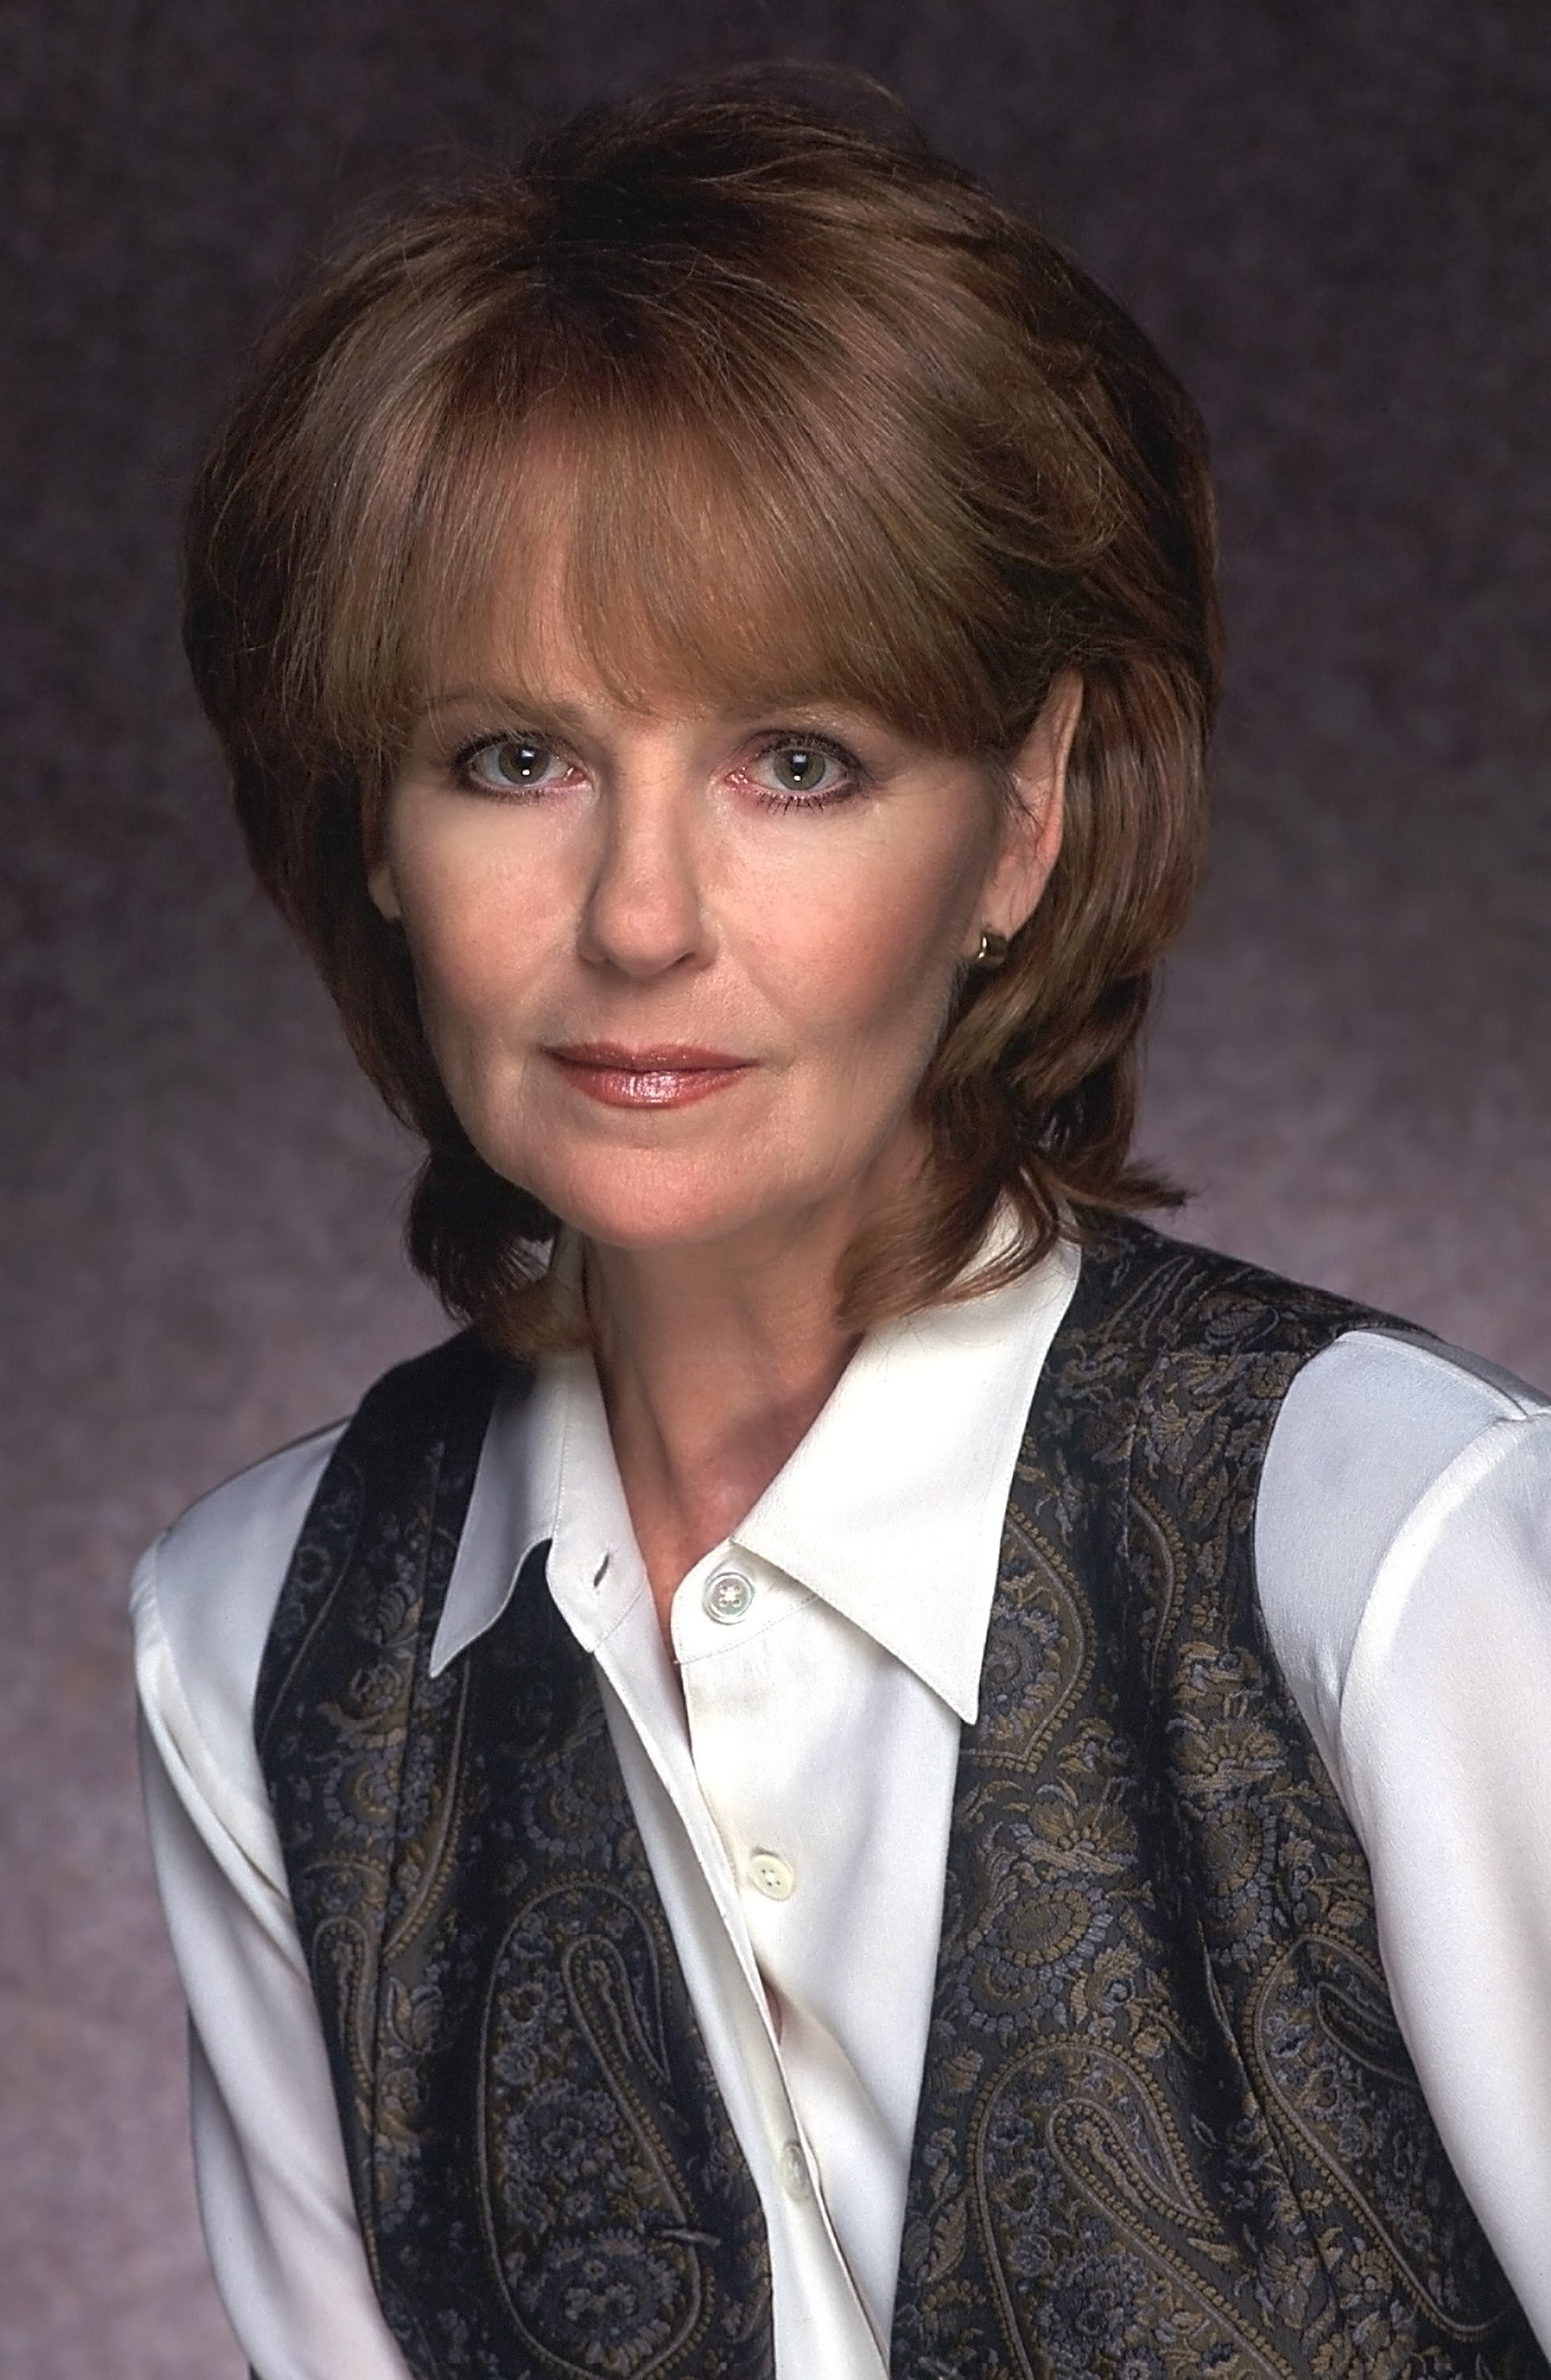 Shelley Fabares as Nancy Erickson in "Playing to Win: A Moment of Truth Movie" on June 14, 2006 ┃Source: Getty Images